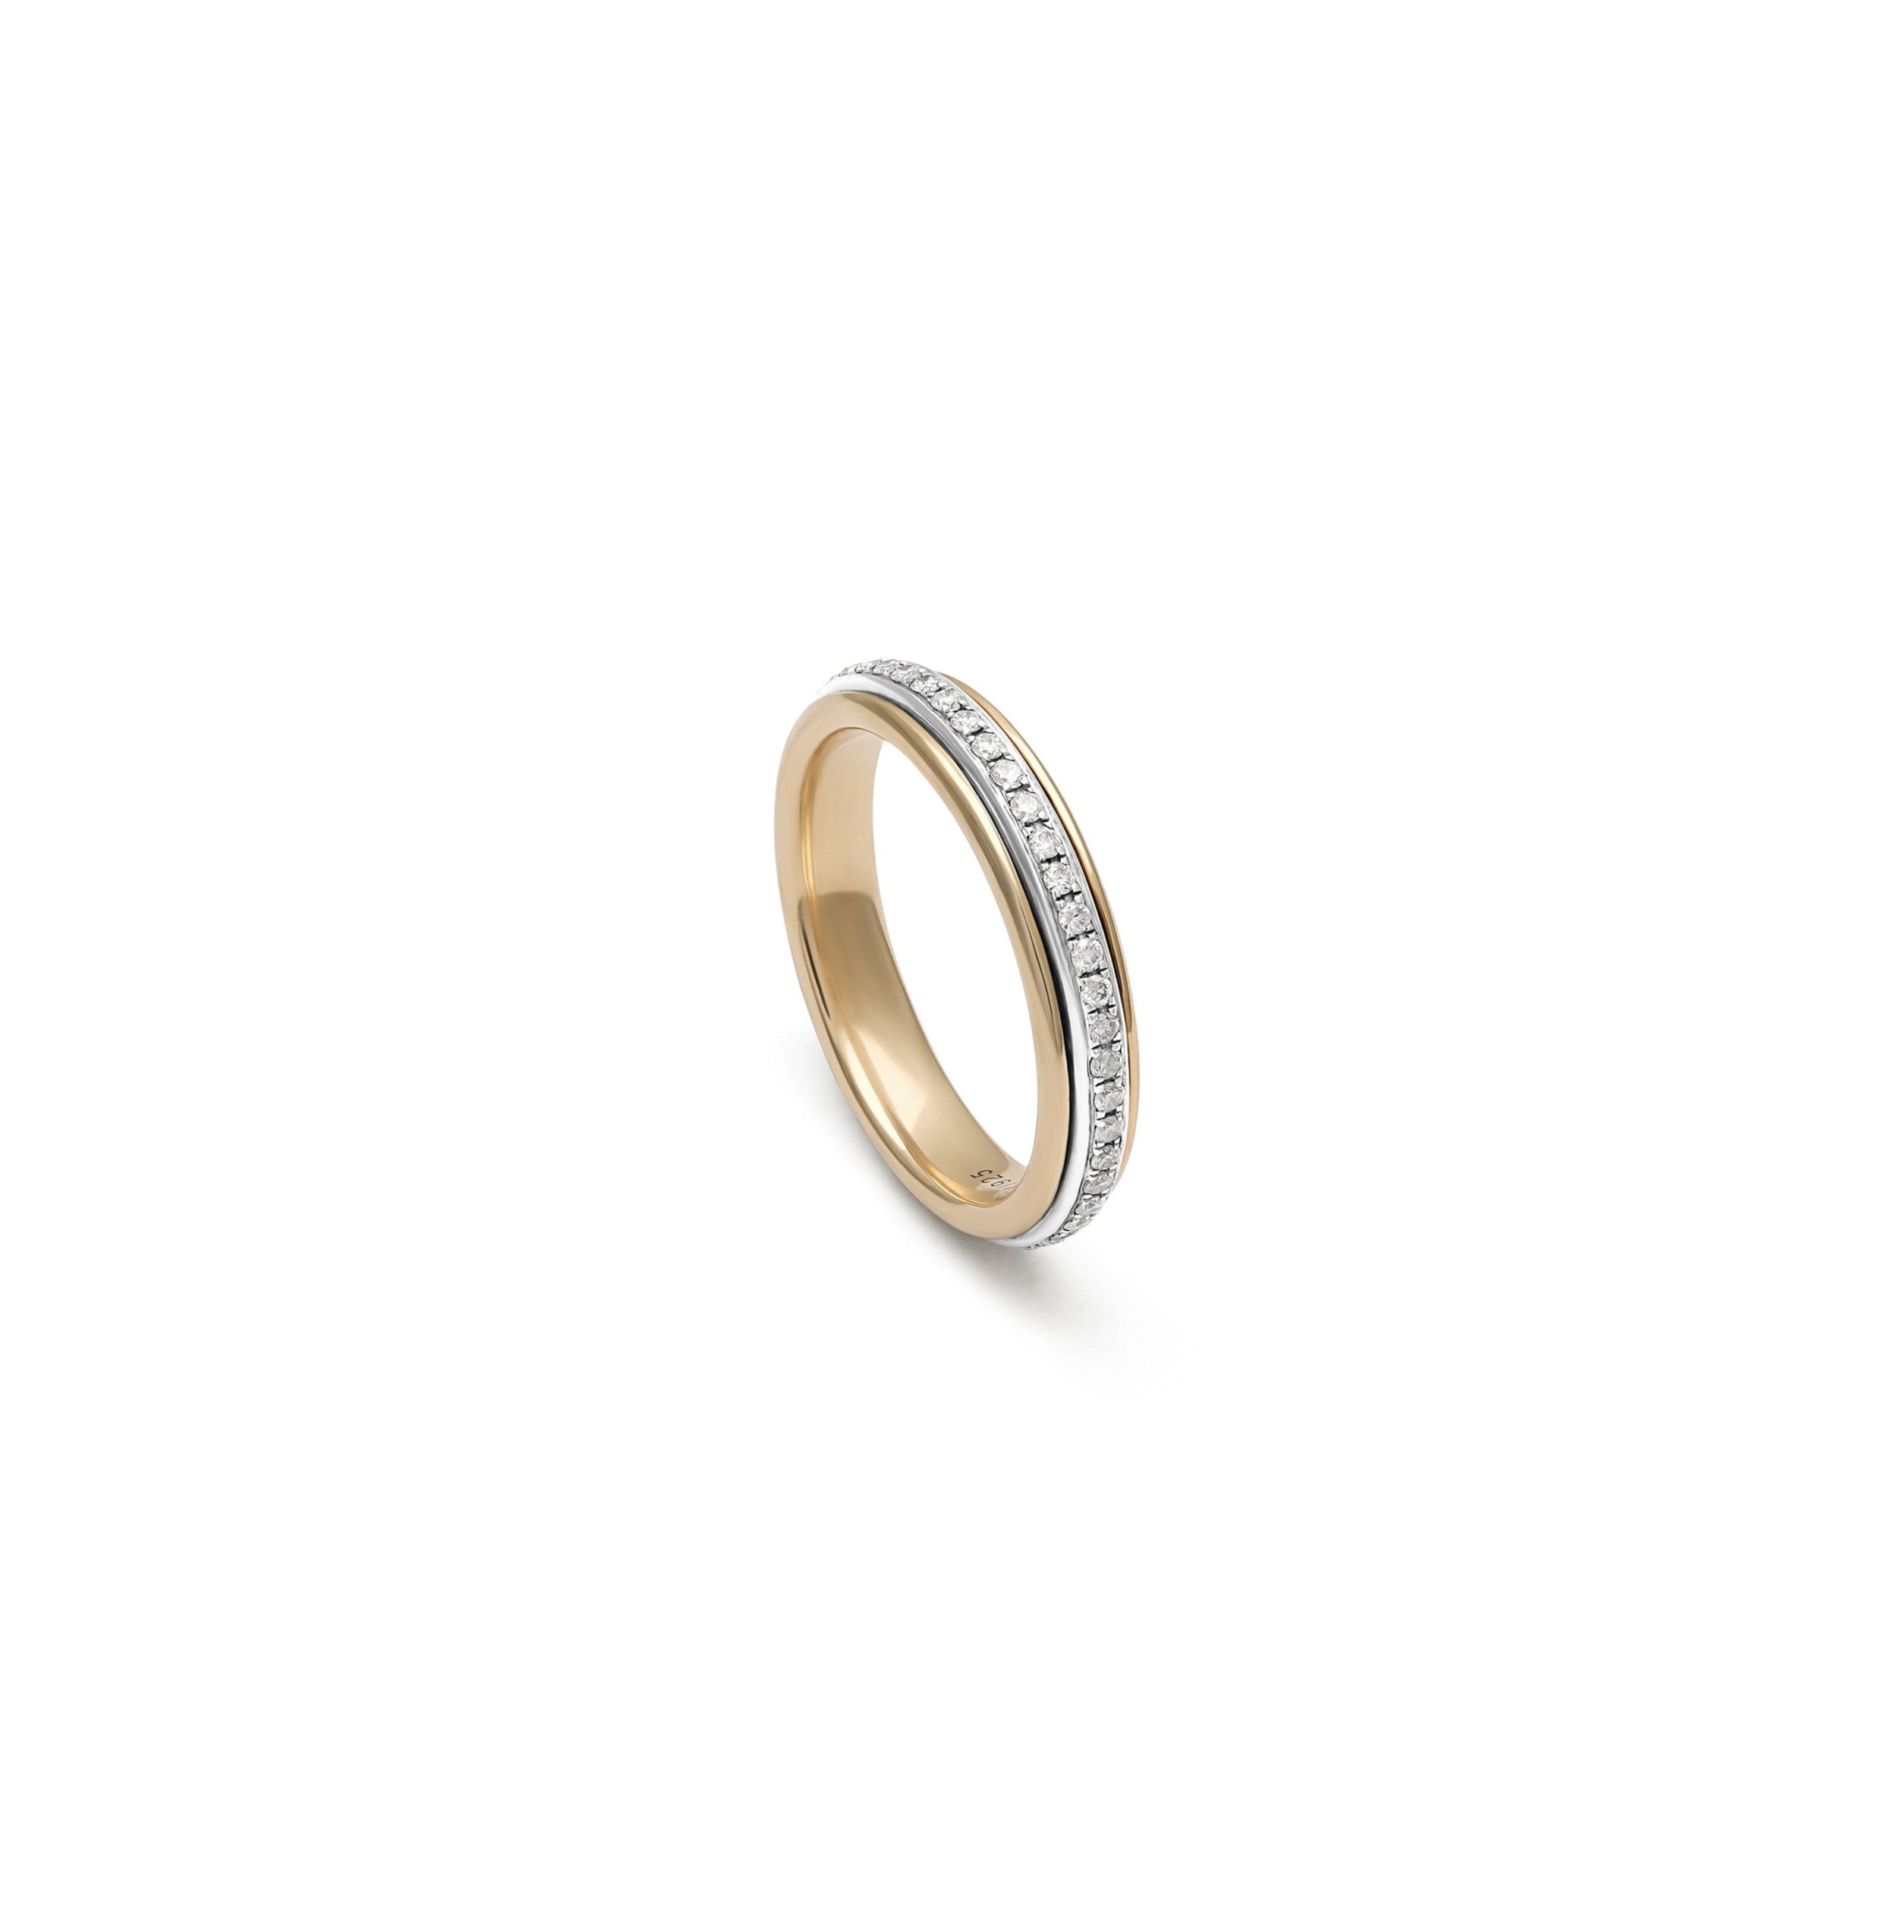 MAOR Orb Medium Band Ring Yellow Gold and Sterling Silver 